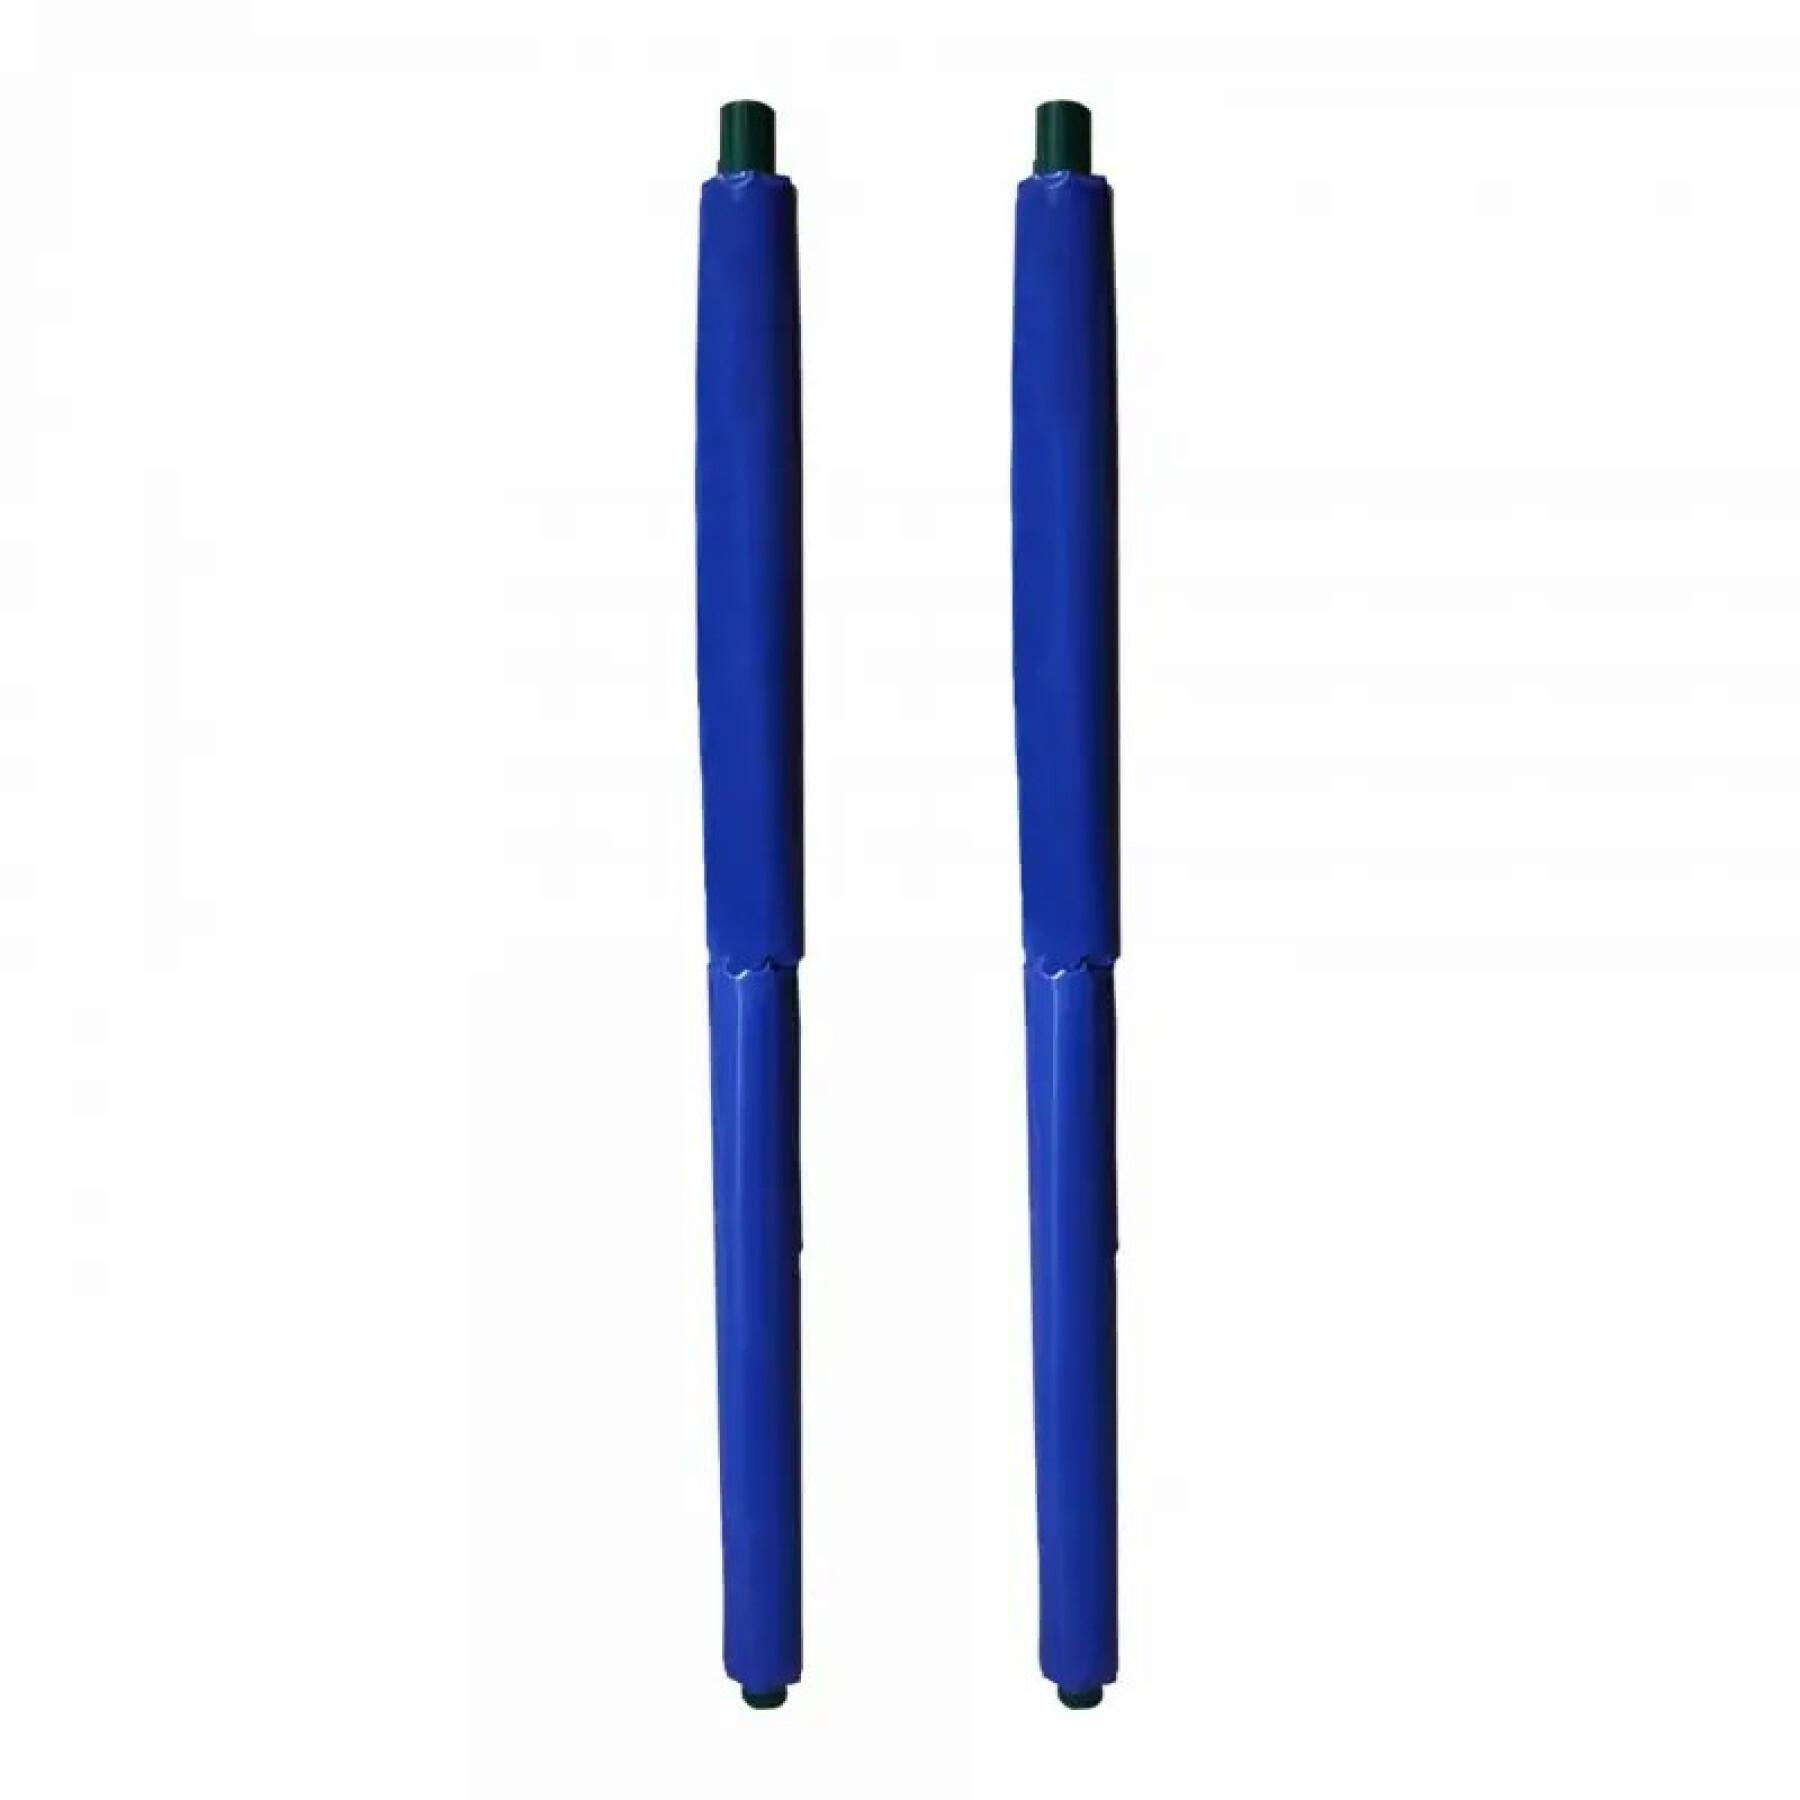 Set of 2 volleyball post protectors Softee Equipment